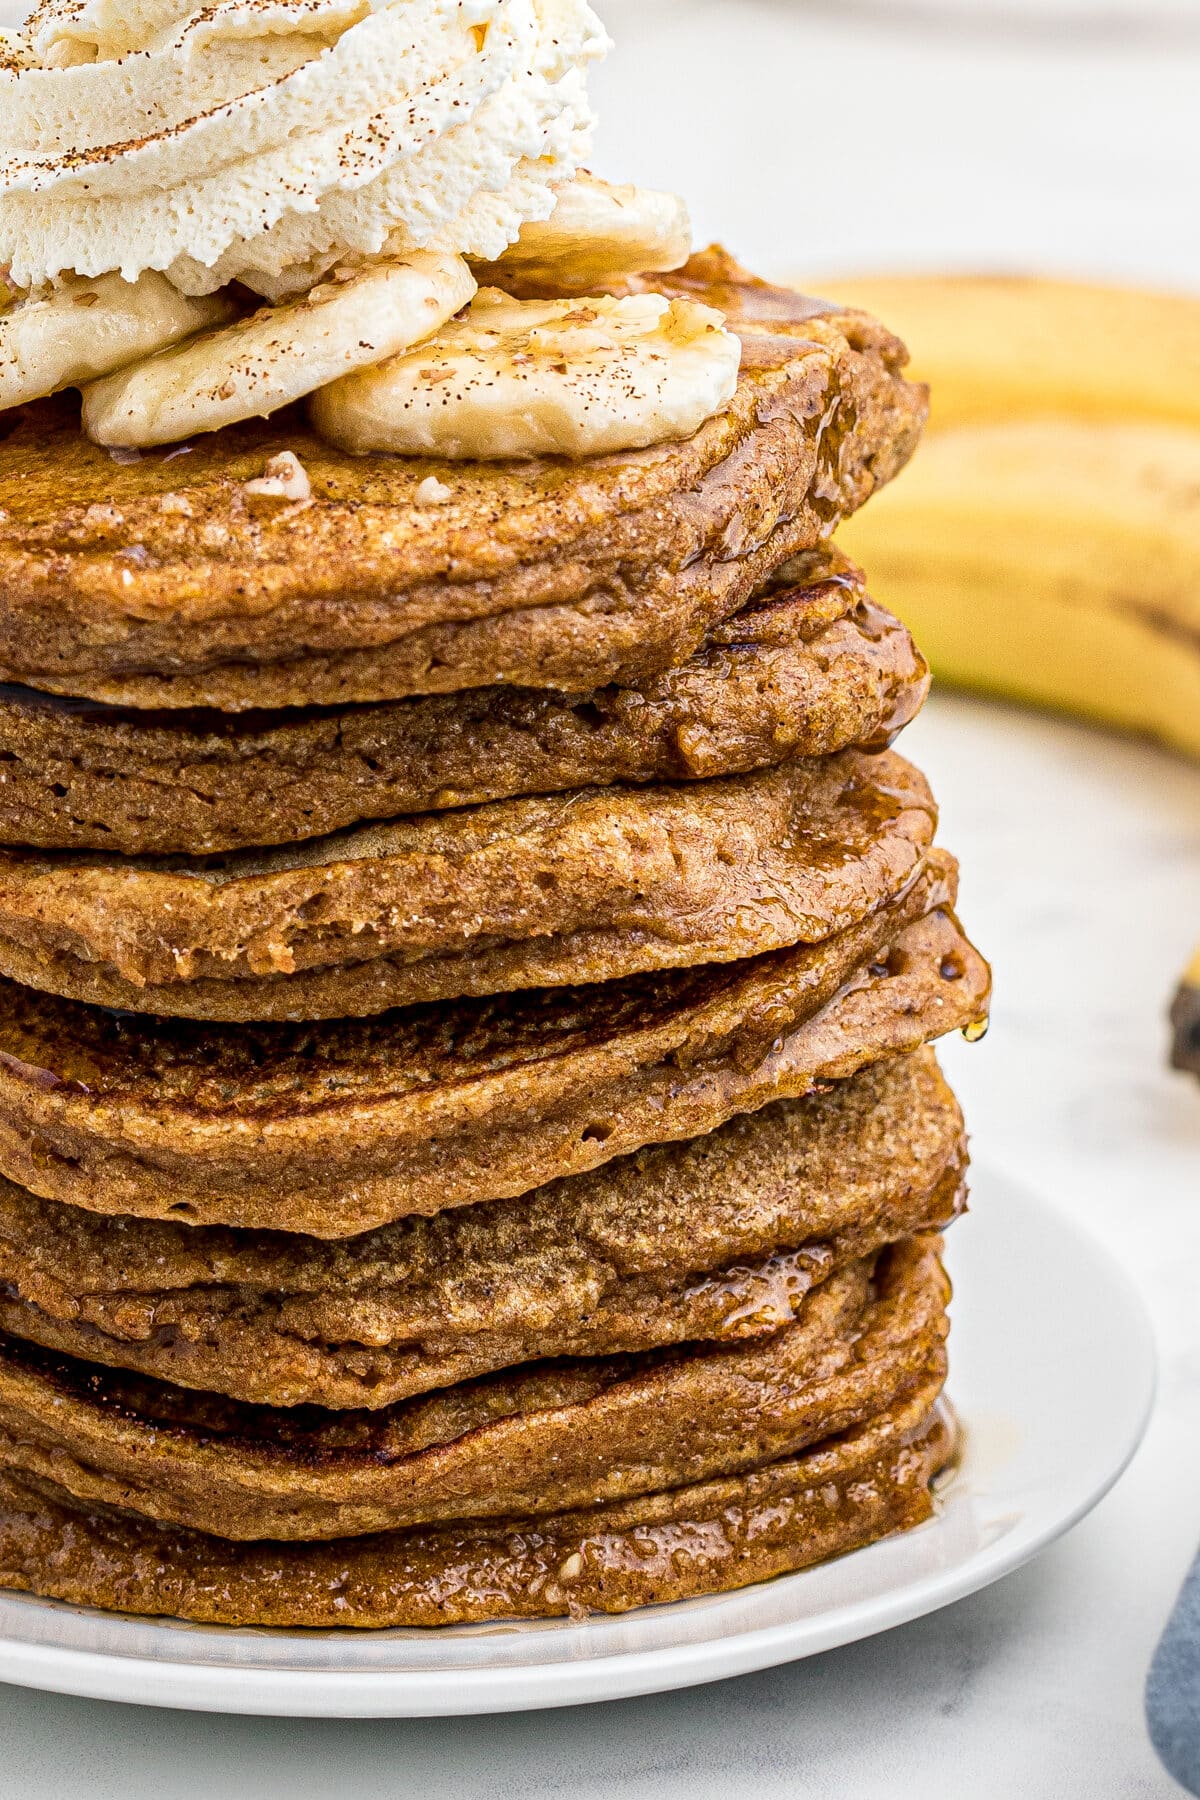 Close-up photo of Sweet Potato Pancakes with Bananas, Whipped Cream, Cinnamon and Chopped Nuts